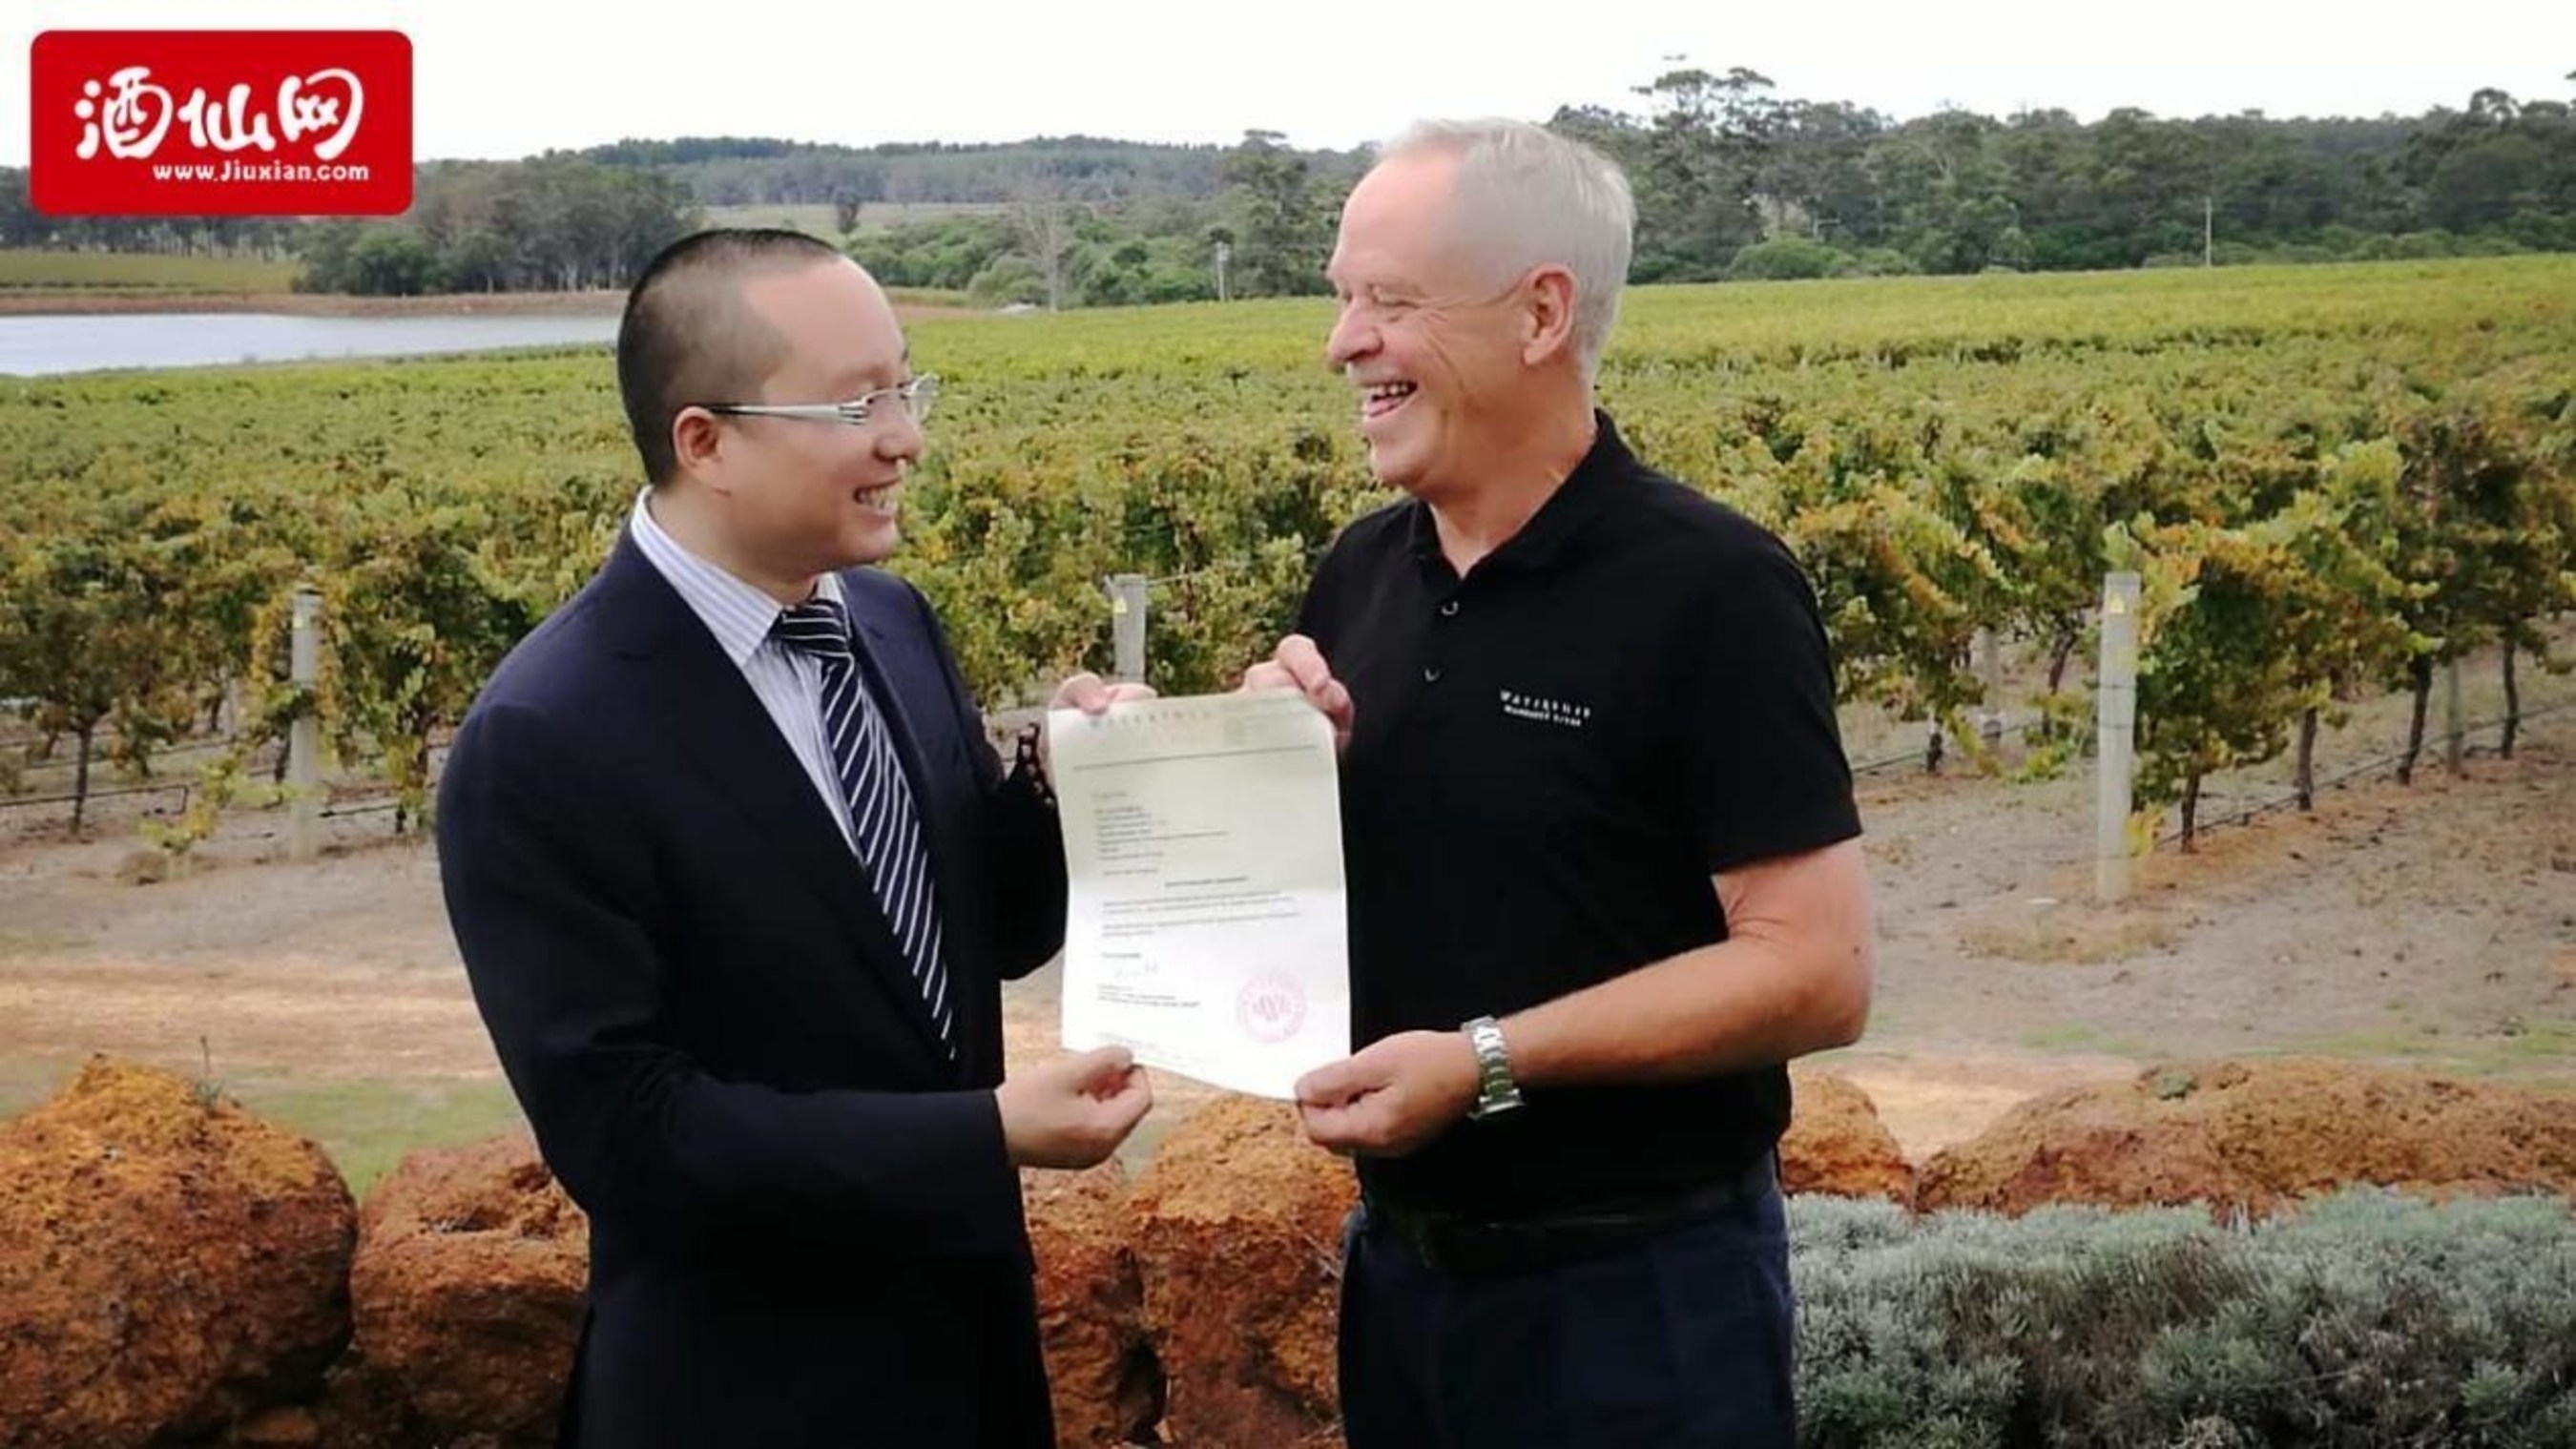 Watershed Premium Wines presents letter of authorization to Jiuxian.com during the Chinese alcohol retailer's visit to the vineyard to select wines as part of direct purchase agreement